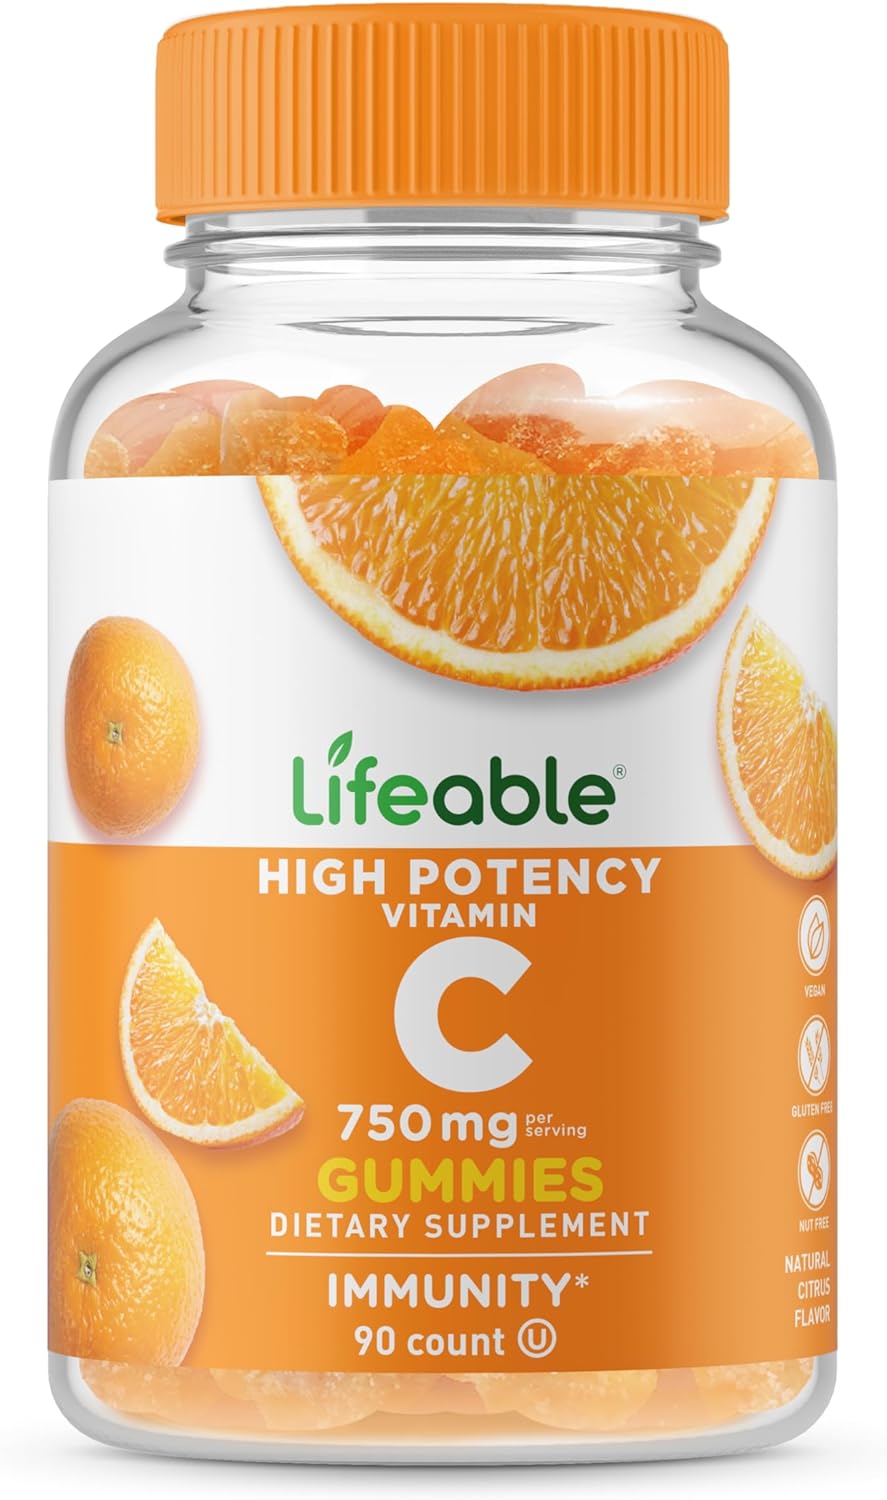 Lifeable Vitamin C - Great Tasting Natural Flavor Gummy Supplement - Vegetarian GMO-Free Chewable Vitamins - for Immune Support - 90 Gummies (750 mg)